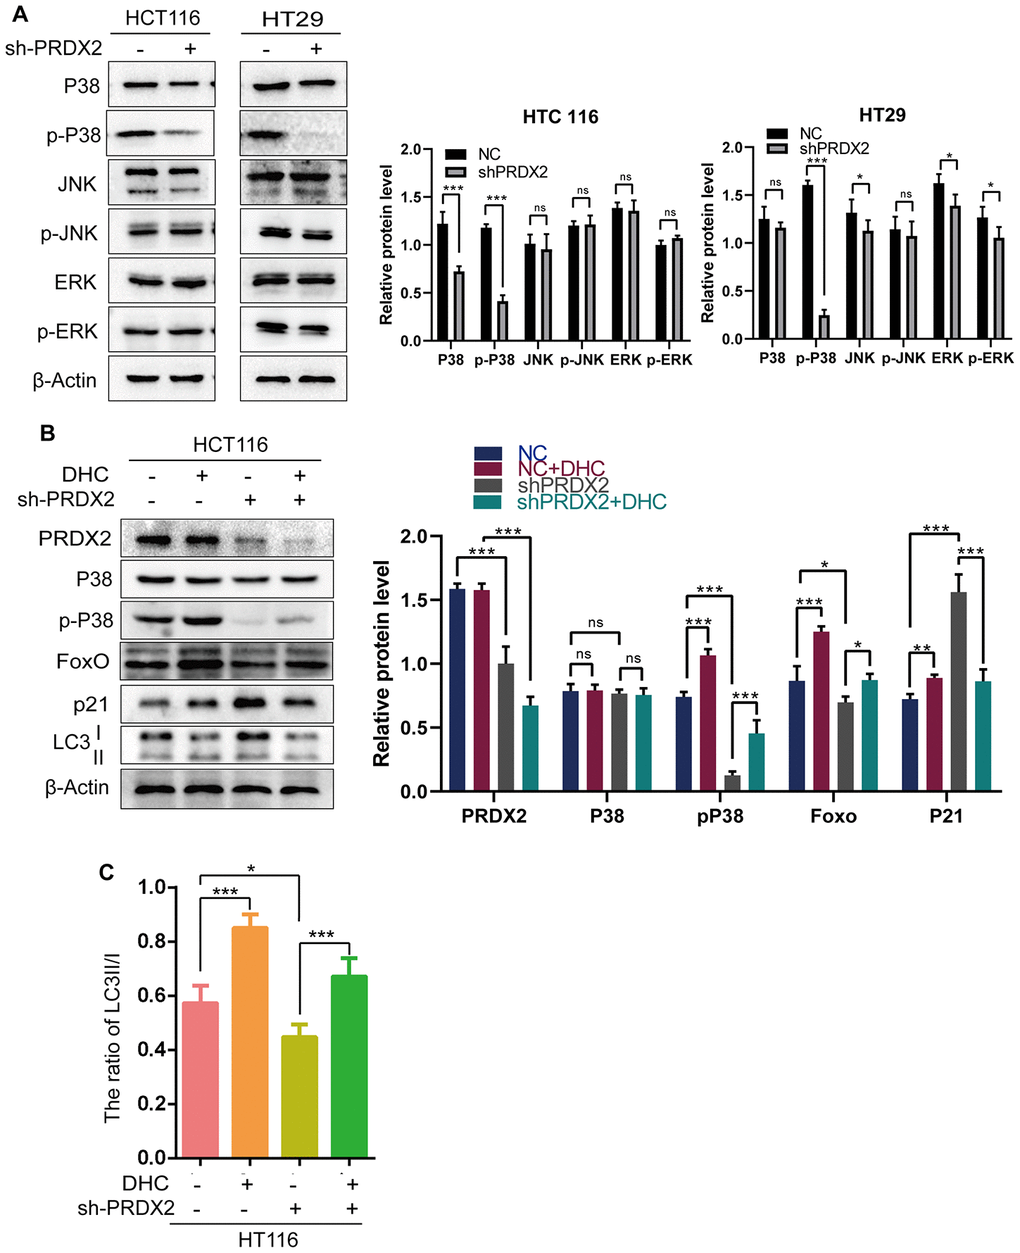 The effects of PRDX2 on the cell cycle and autophagy are mediated by the P38 pathway. (A) Western blots of MAPK signaling-related proteins. (B) Western blots of proteins related to the P38 pathway (P38 and p-P38), cell-cycle regulation (P21) and autophagy (LC3B) in sh-PRDX2 and control CRC cells with or without exposure to DHC (1 μM) for 24 h. (C) The ratio of LC3 II/I. The data are shown as the mean ± SD of three experiments. *P P P 